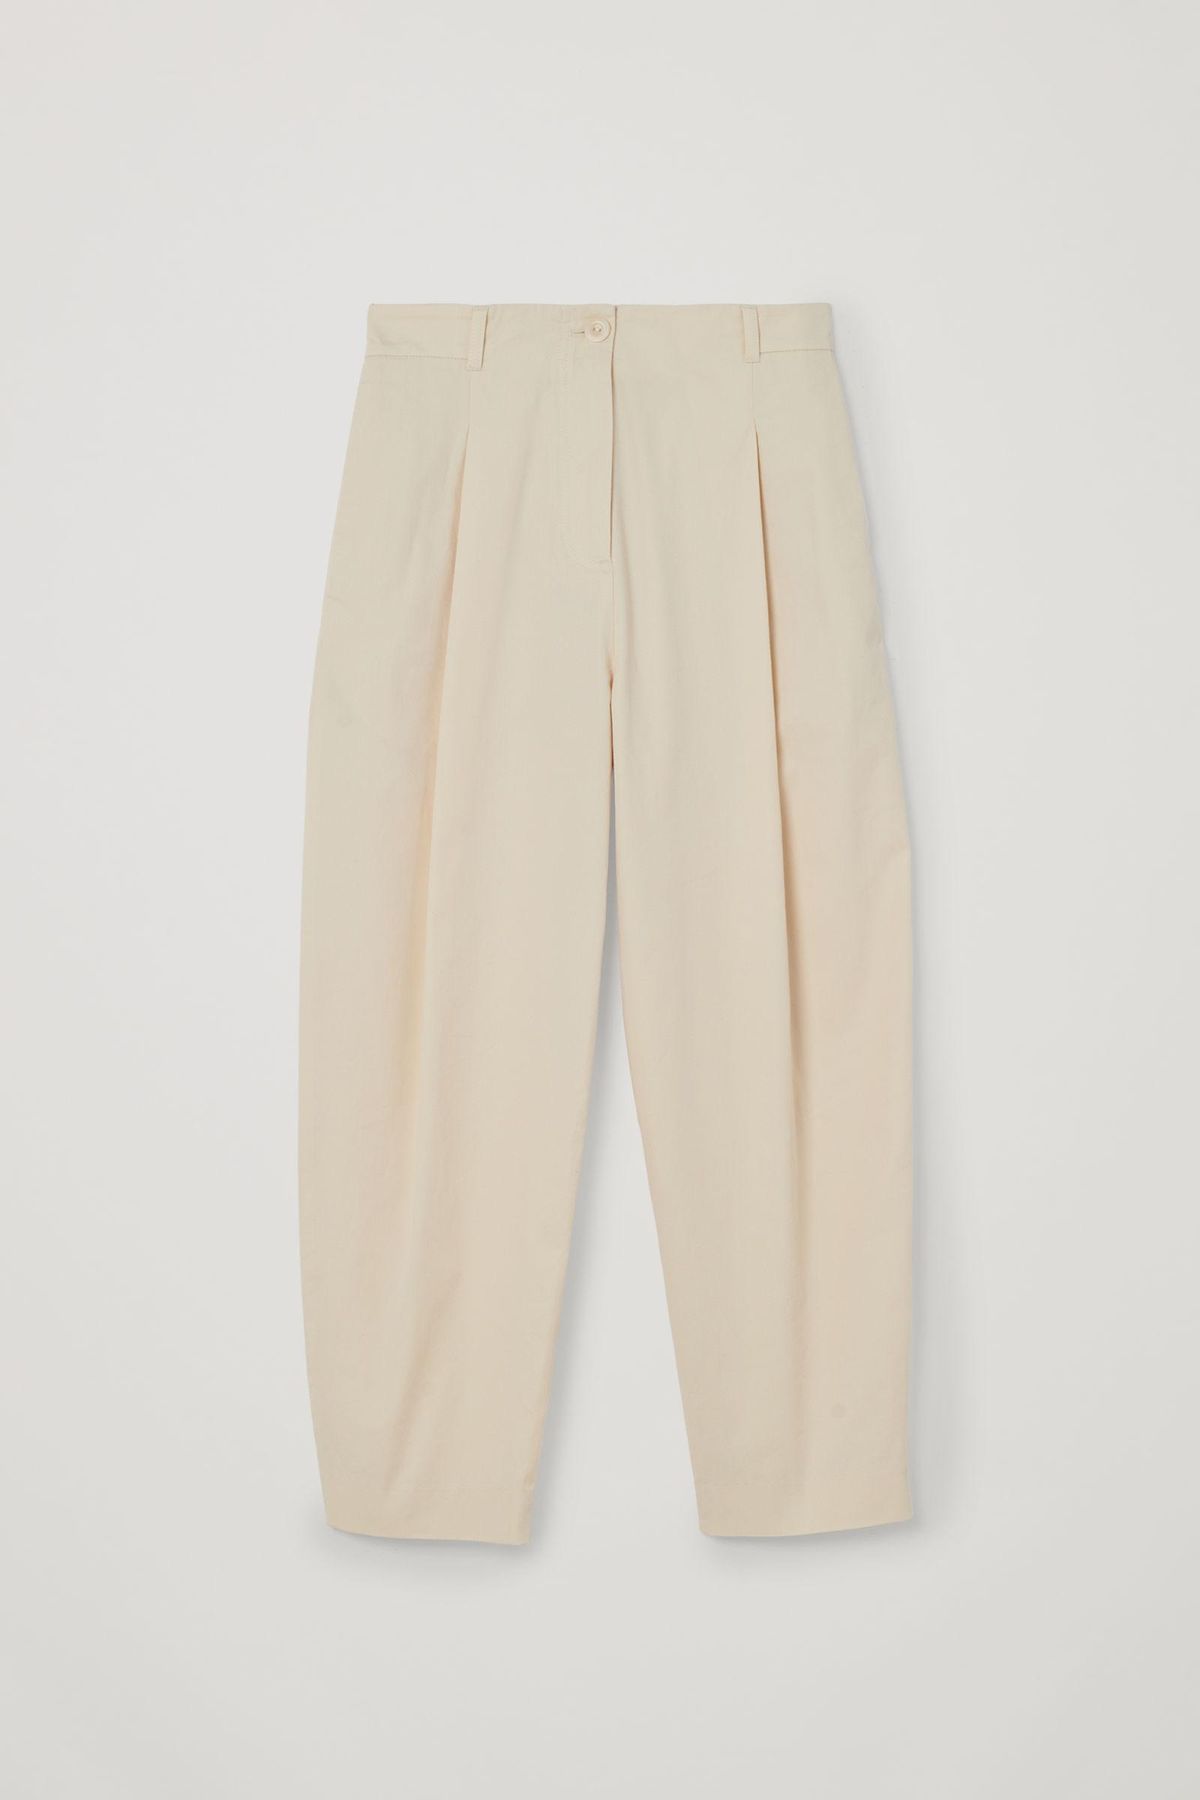 Rounded Cotton Pants